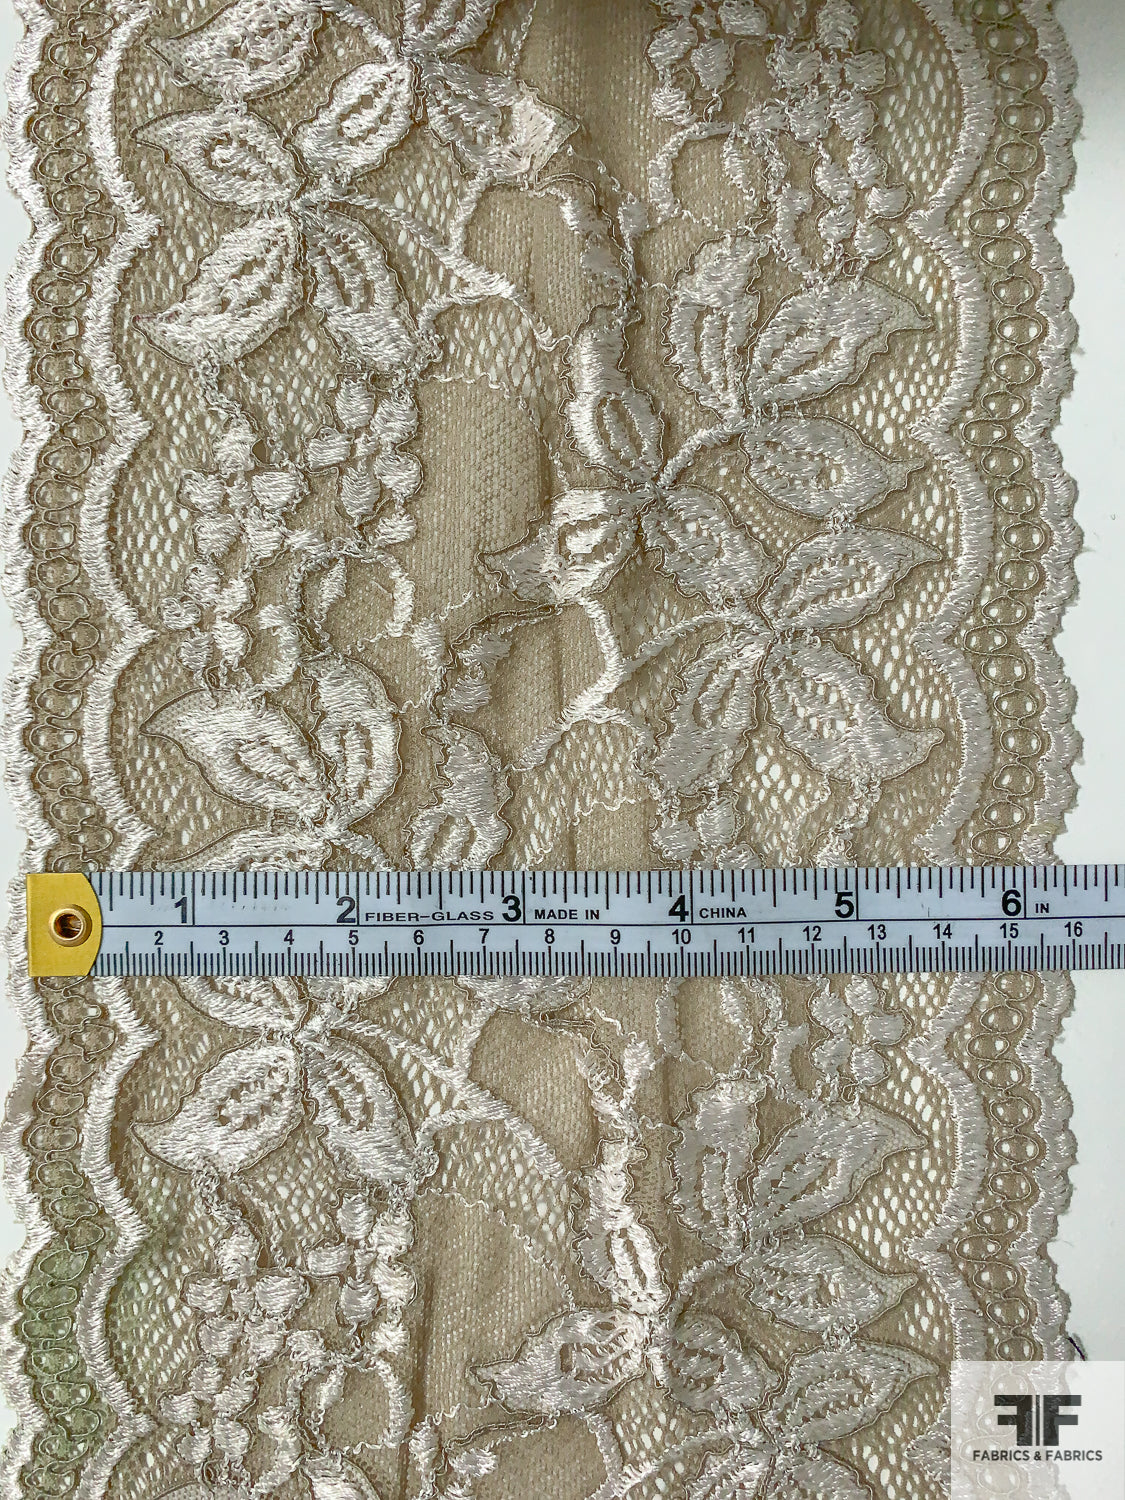 Vintage-Look Floral Stretch Leavers Lace Trim - Khaki Stone / Ivory -  Fabric by the Yard